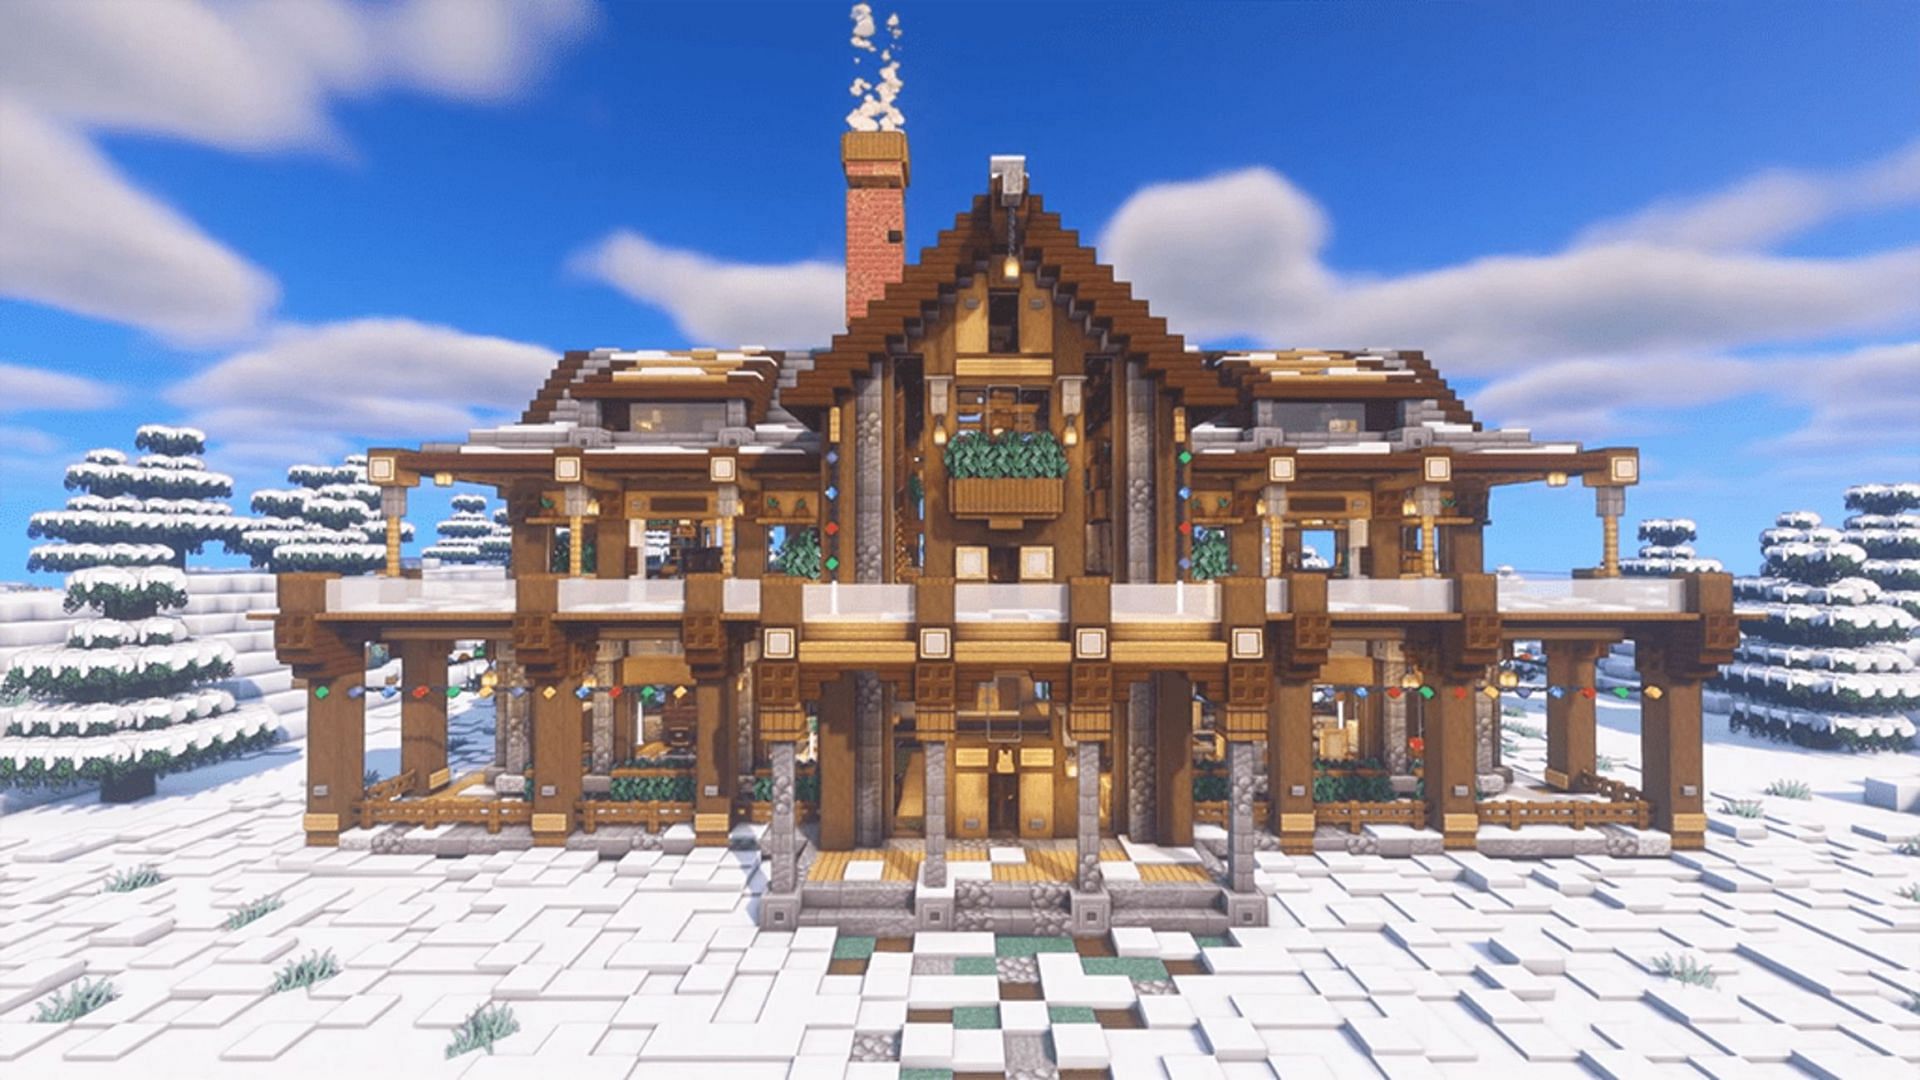 House in the mountain. #minecraft #minecraftbuilding #minecrafttuto, mountain house minecraft